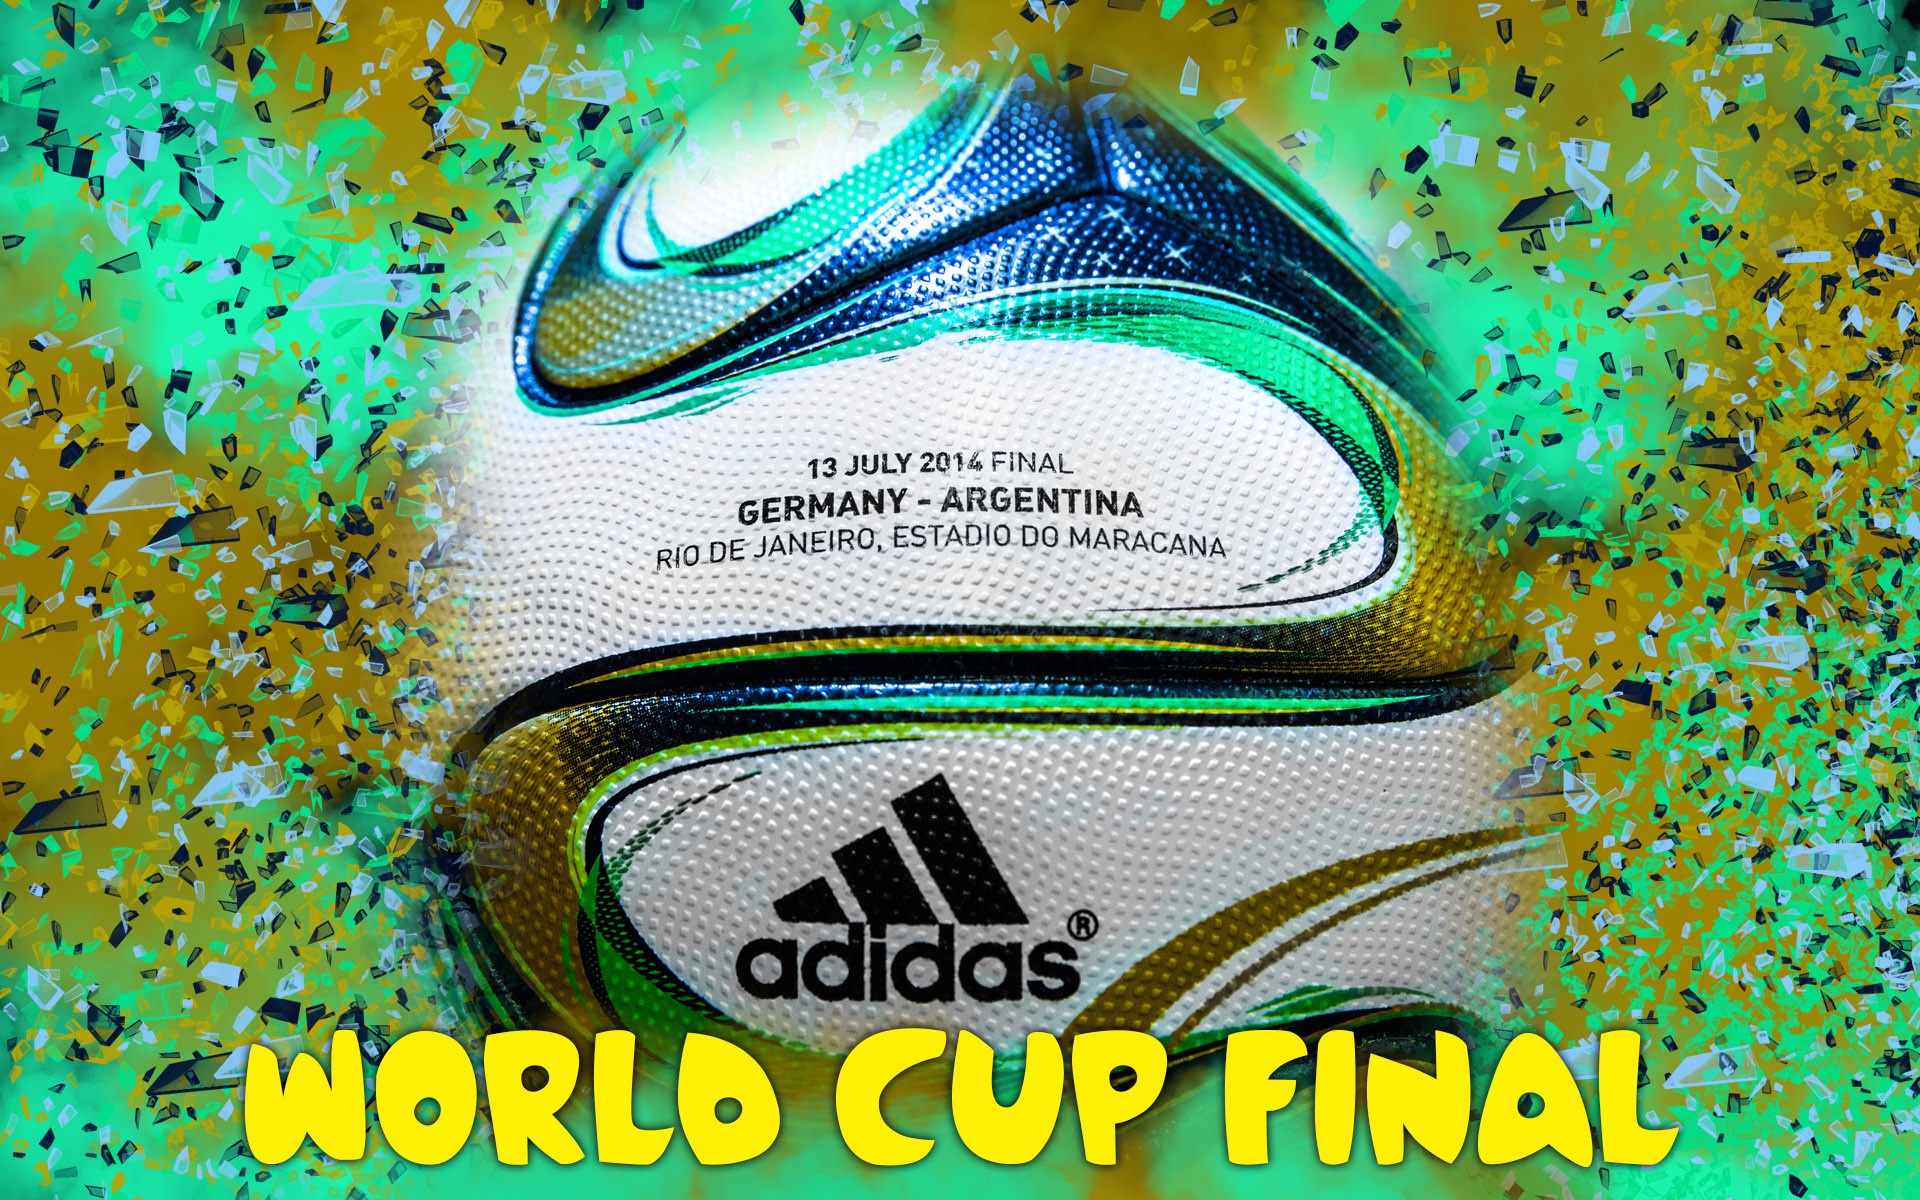 Brazuca Ball For 2014 WC Final